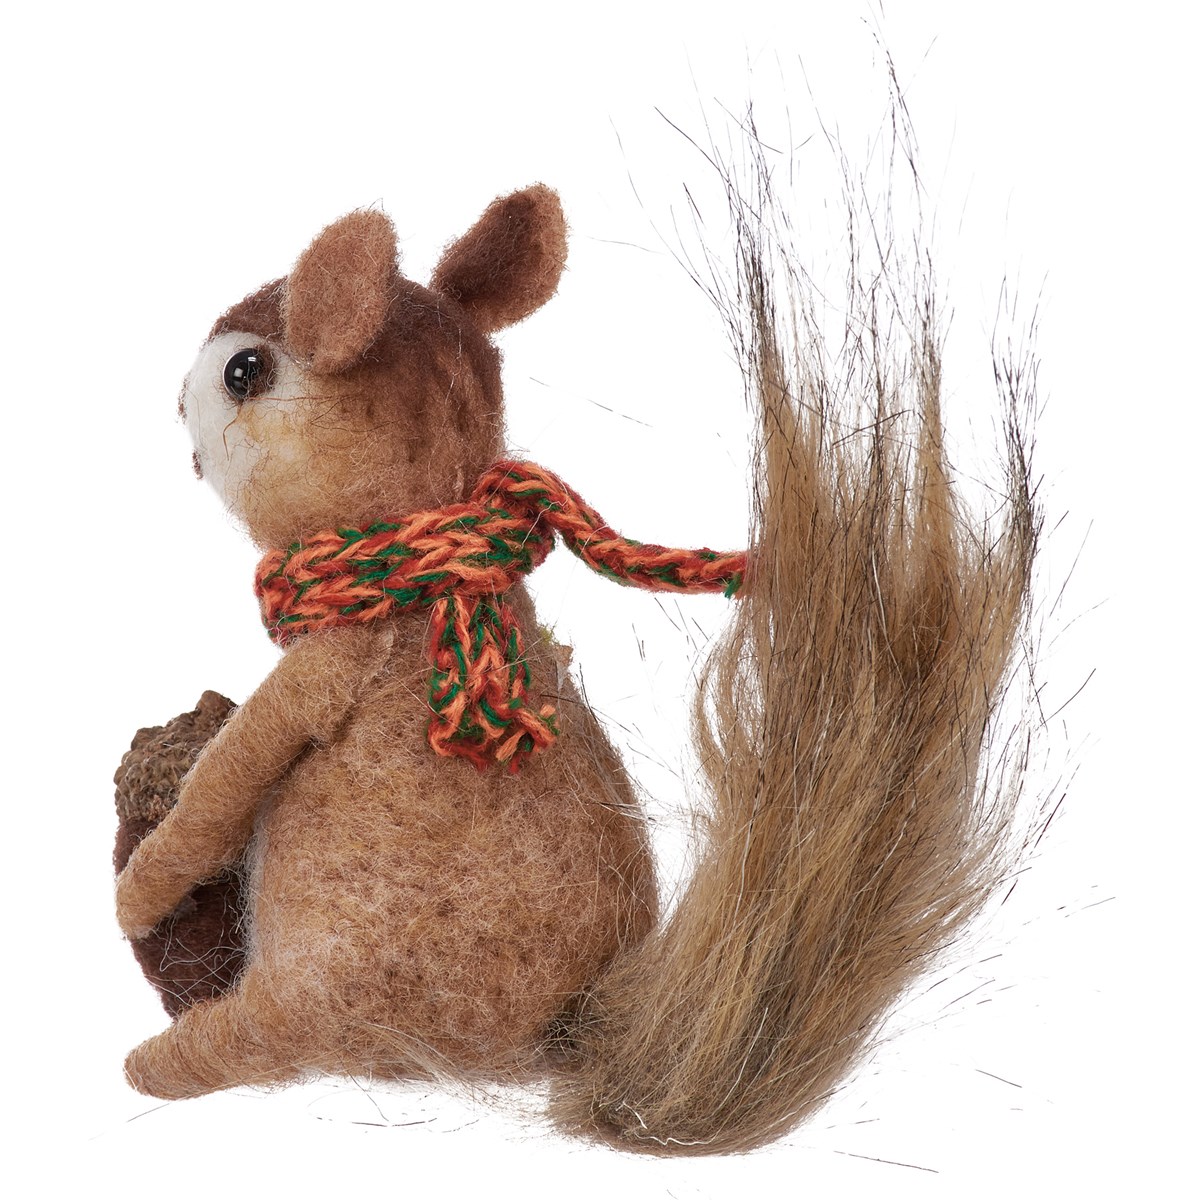 Critter - Squirrel With Scarf - 3.50" x 4" x 2.50" - Wool, Polyester, Jute, Plastic